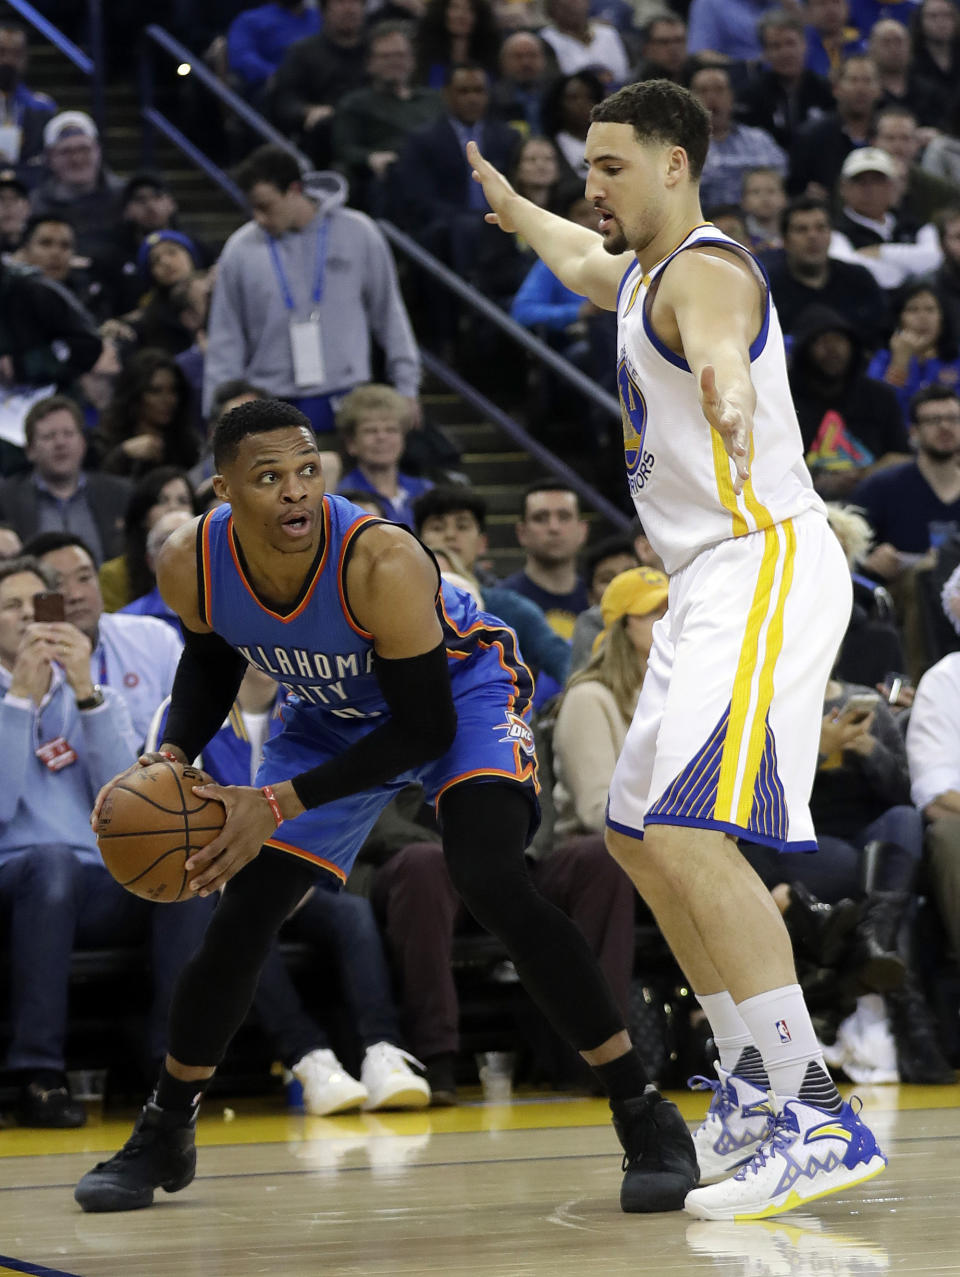 Oklahoma City Thunder's Russell Westbrook, left, is defended by Golden State Warriors' Klay Thompson during the first half of an NBA basketball game Wednesday, Jan. 18, 2017, in Oakland, Calif. (AP Photo/Marcio Jose Sanchez)